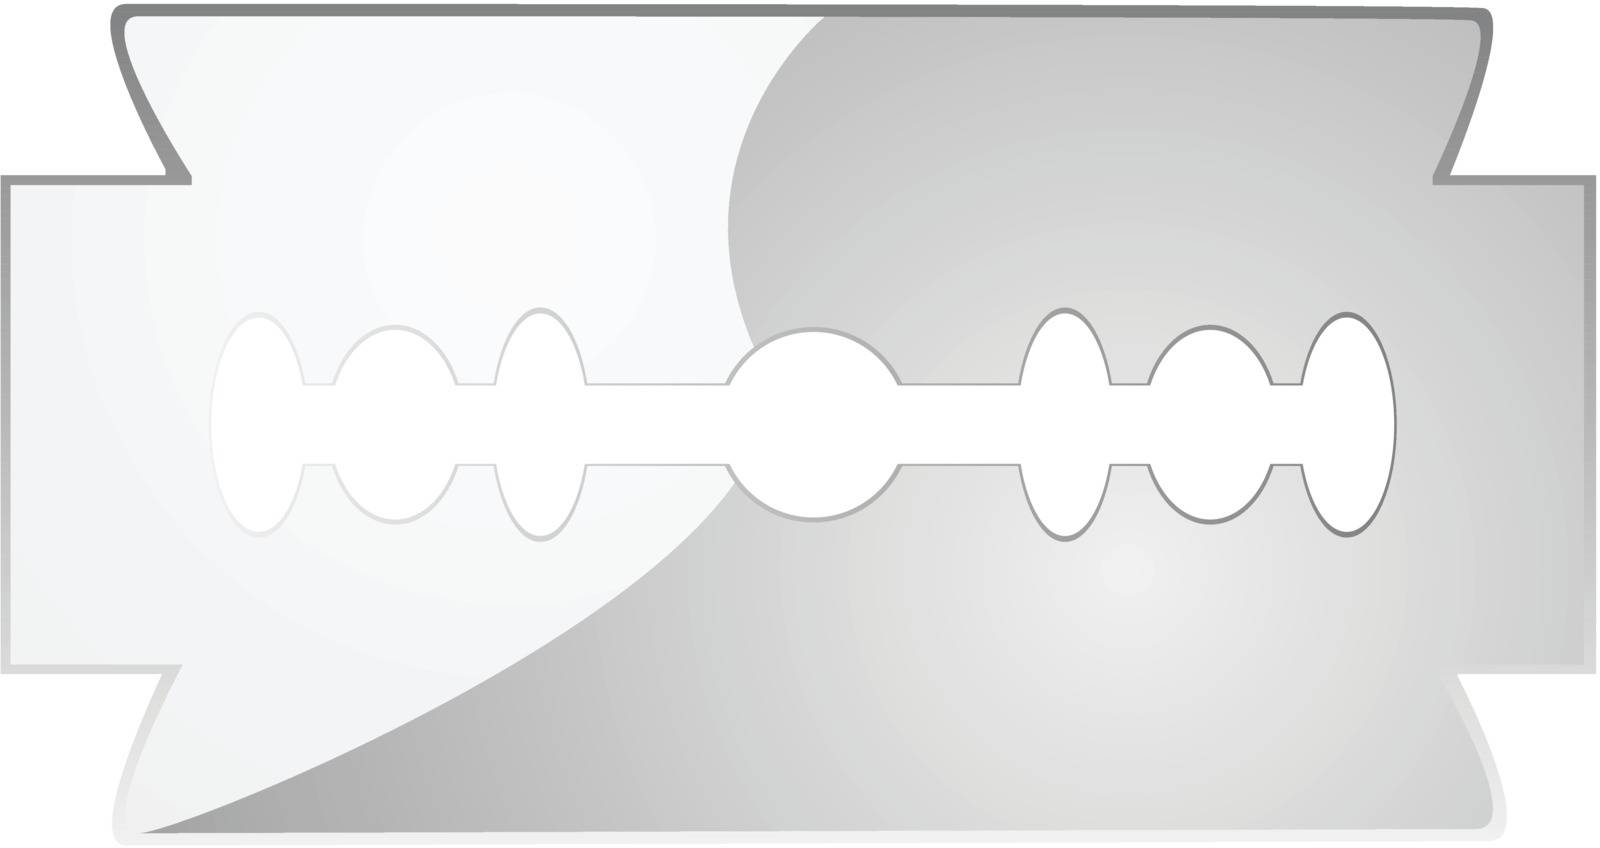 Glossy illustration of a stainless steel razor blade